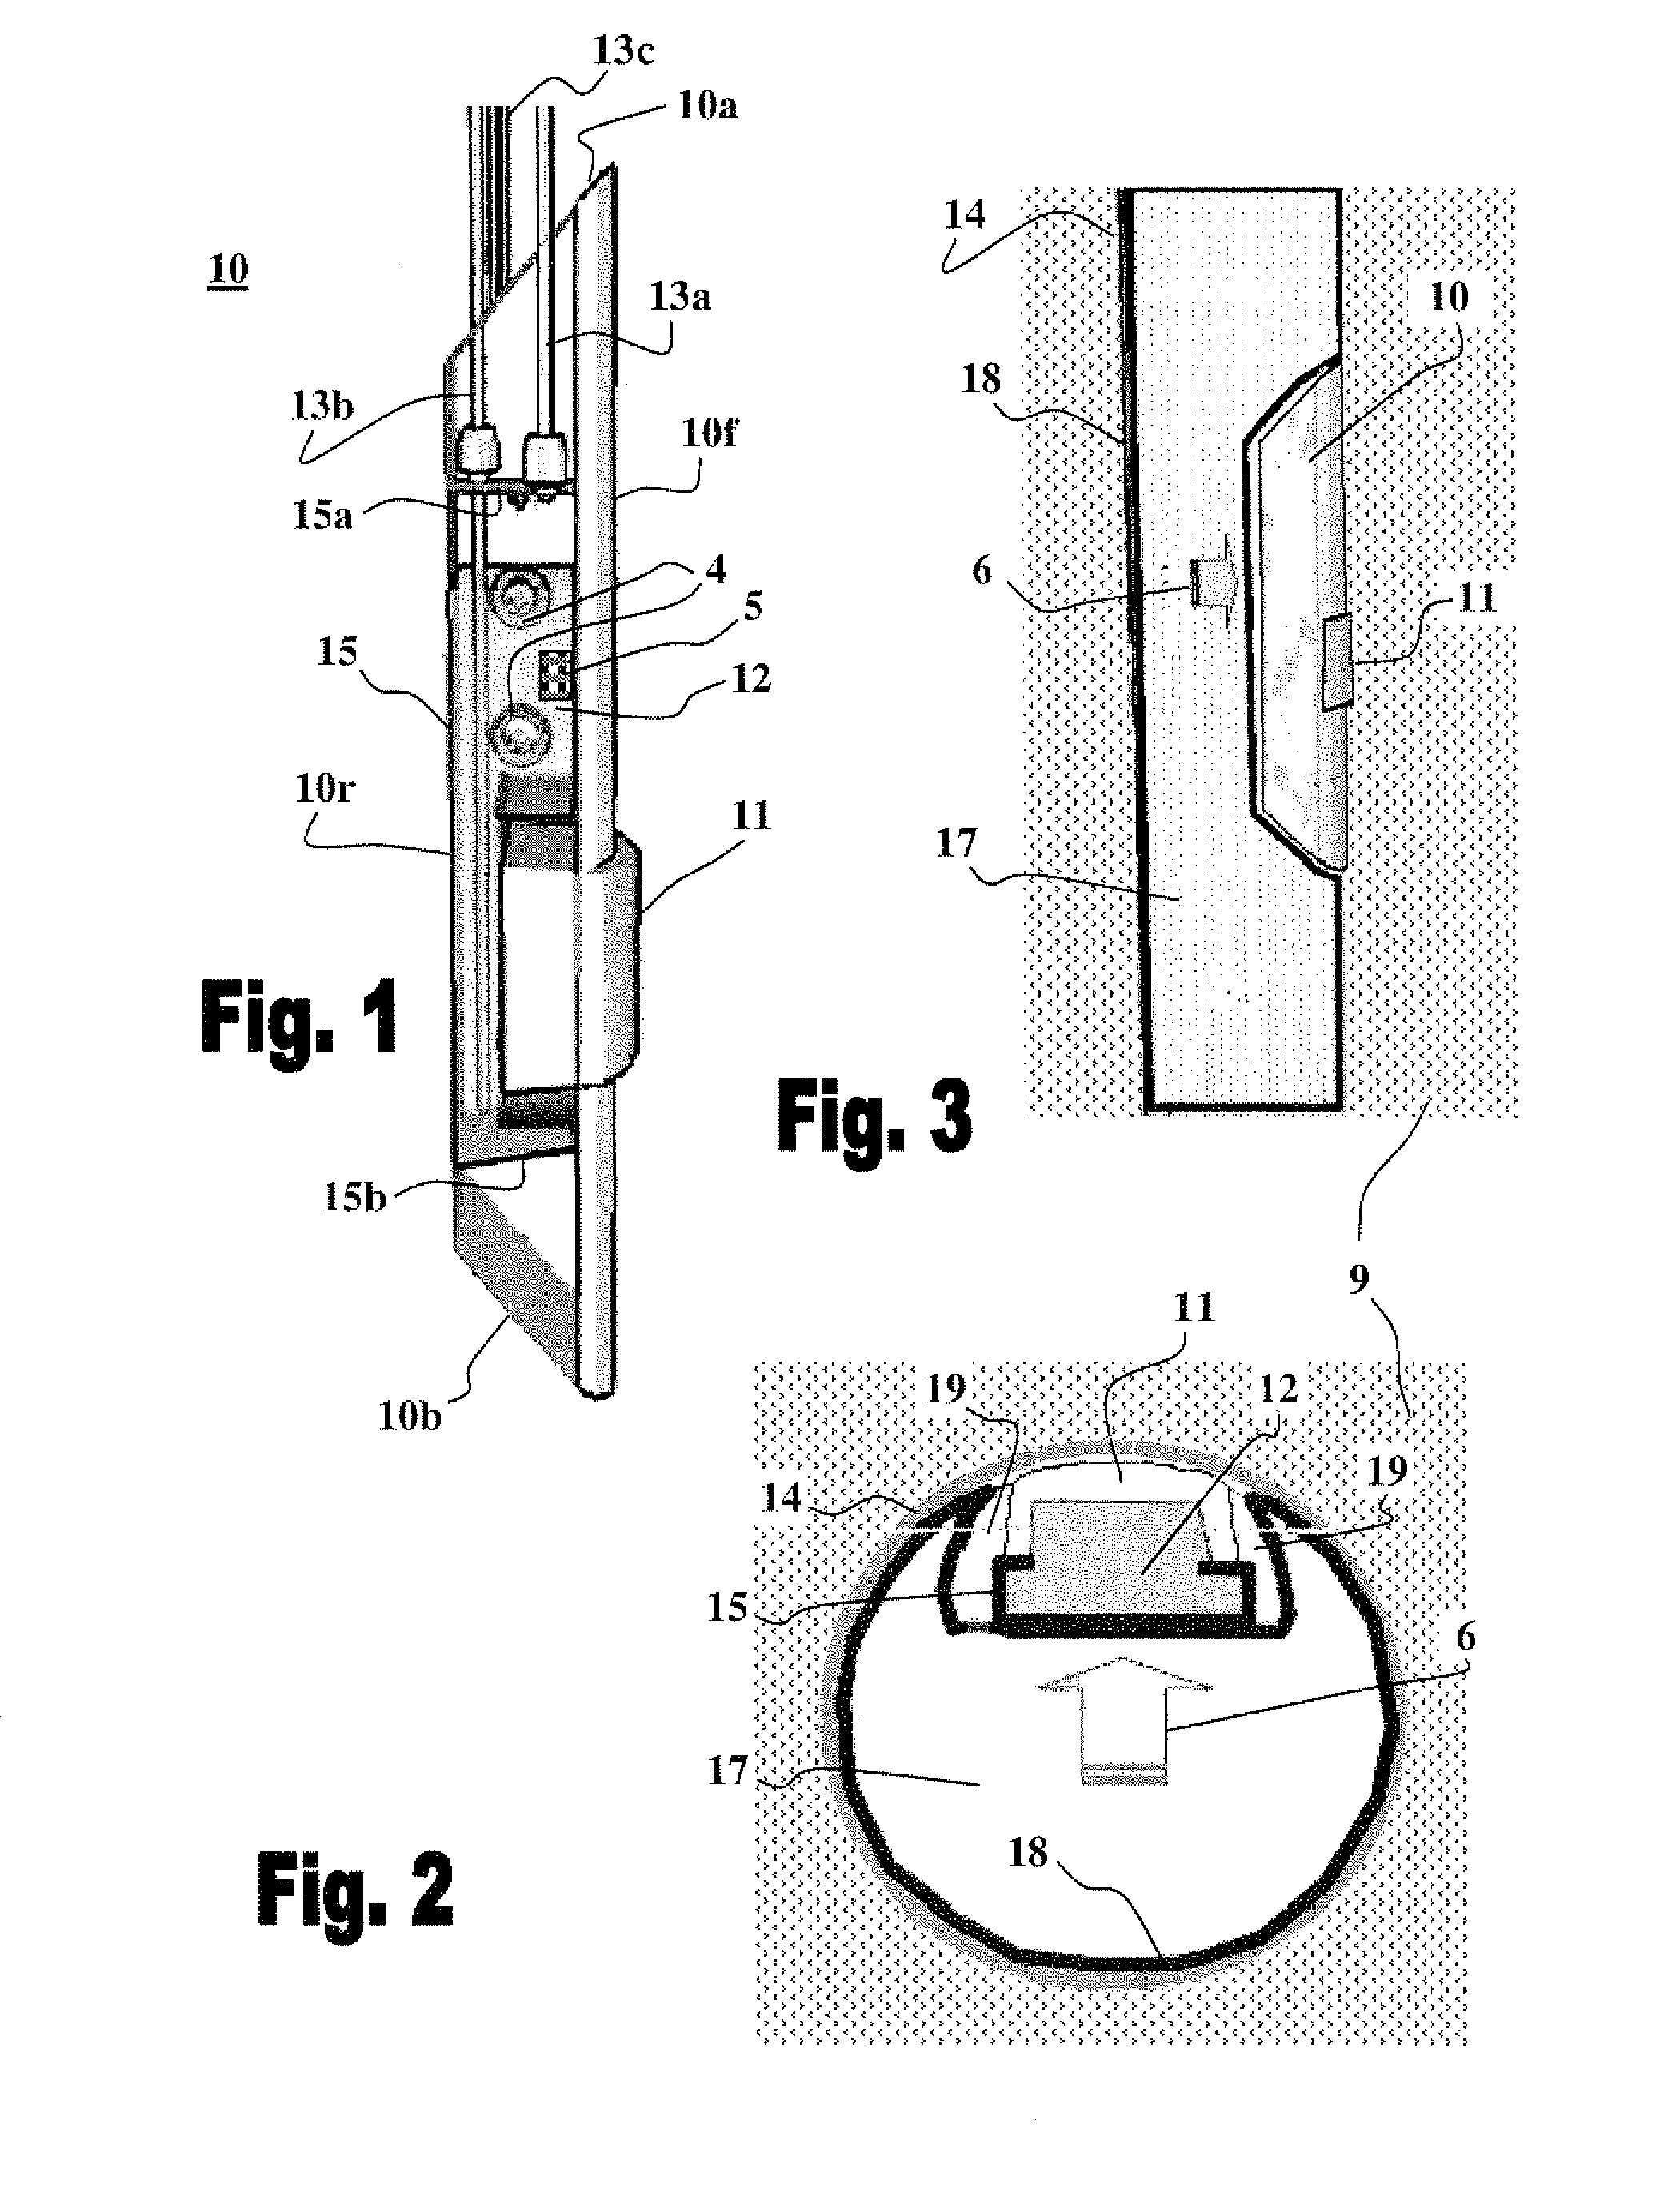 Method and system for monitoring soil properties